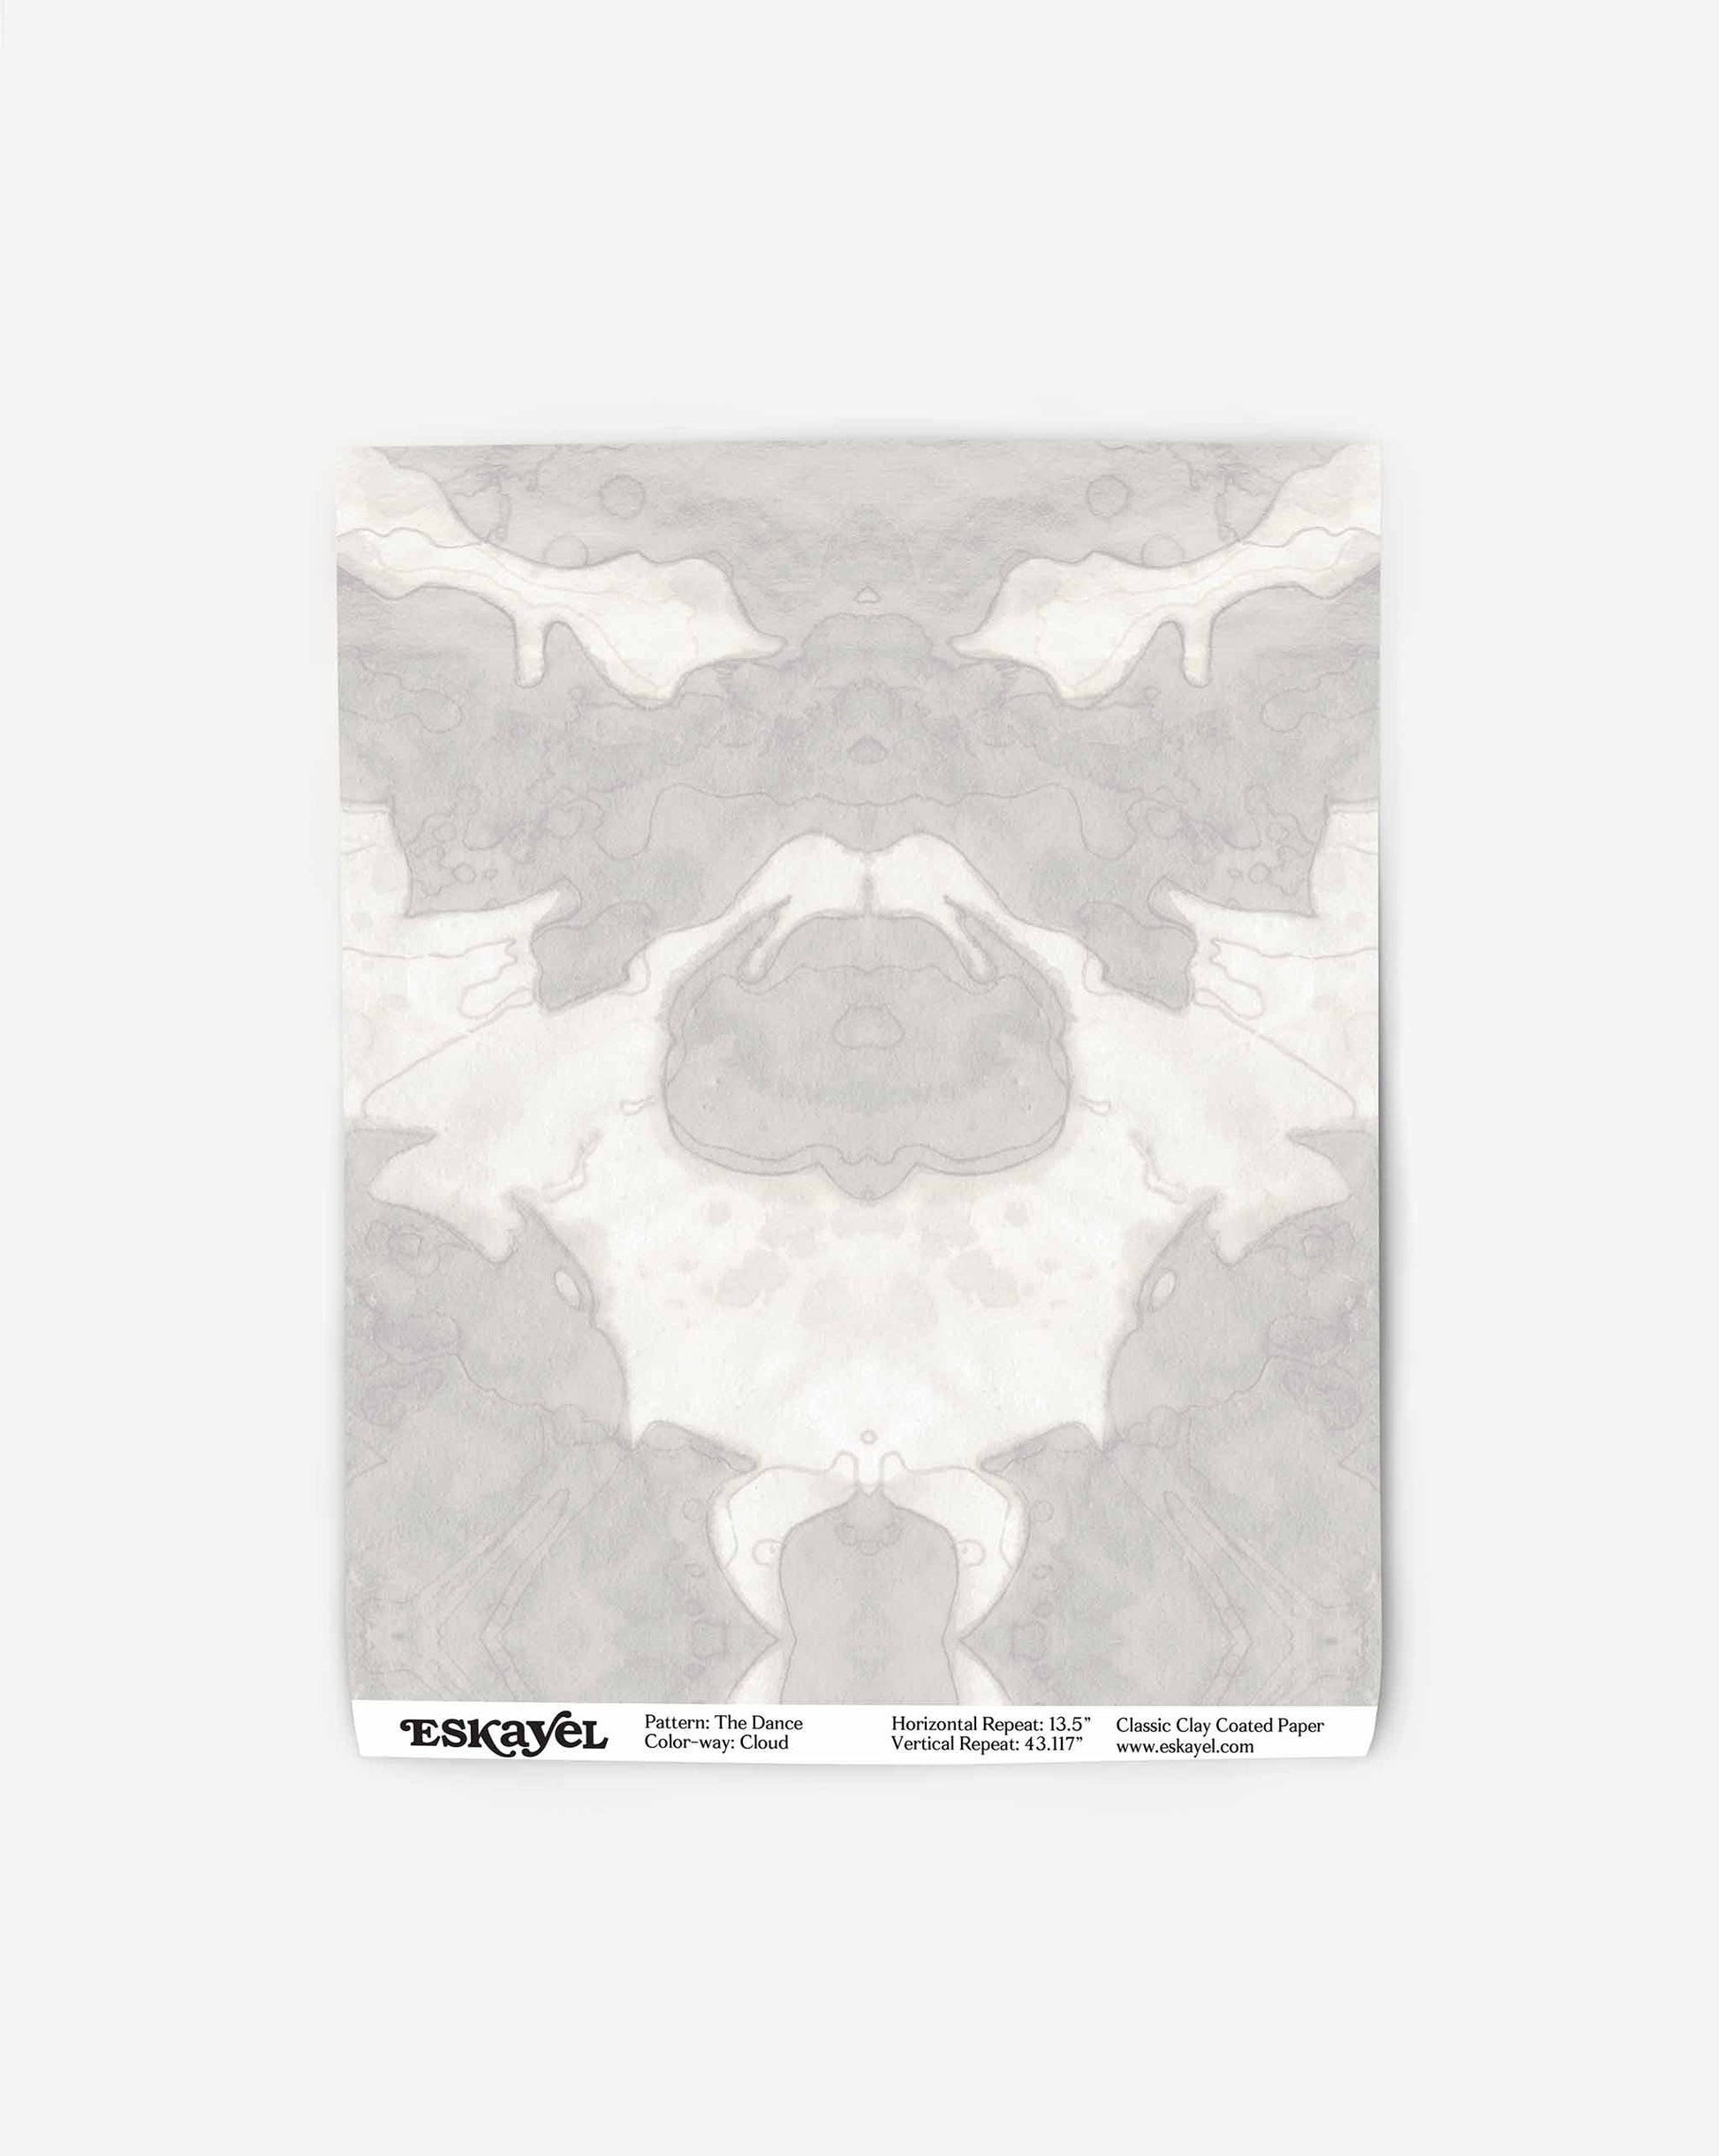 White and gray abstract inkblot pattern on a rectangular sheet of paper with "The Dance Wallpaper||Cloud" and other text printed at the bottom, part of the Lora Collection.